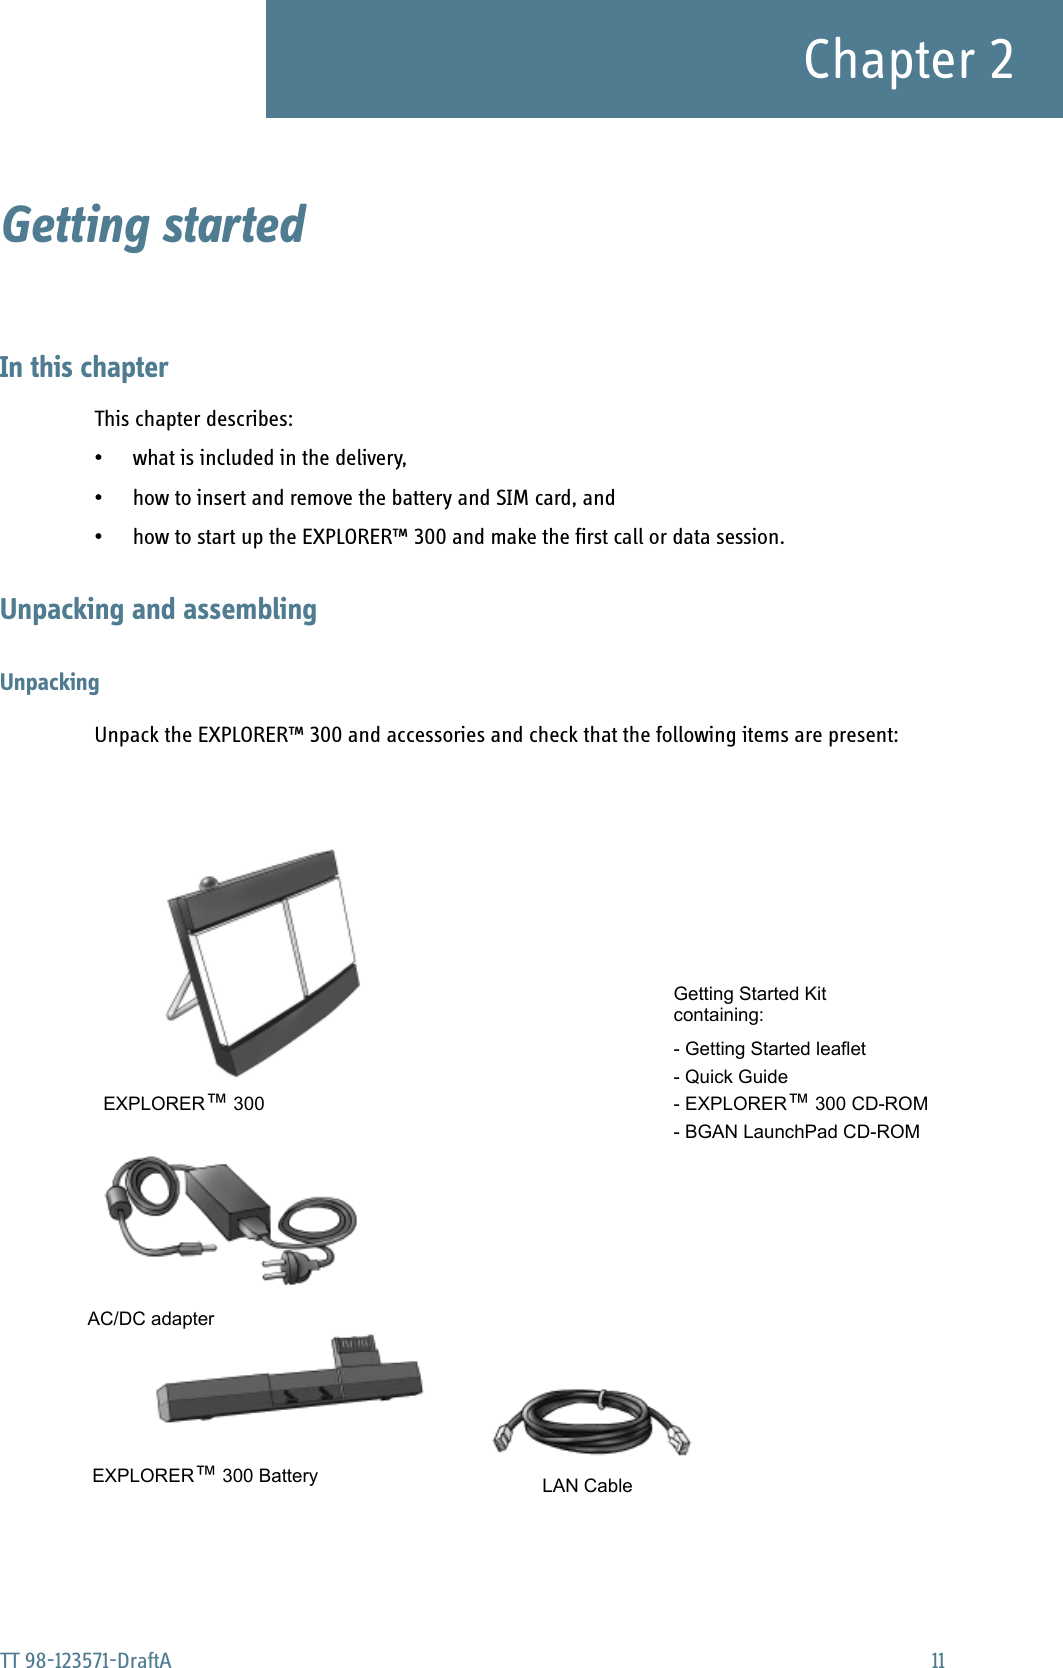 TT 98-123571-DraftA 11Chapter 2Getting started 2In this chapterThis chapter describes:• what is included in the delivery,• how to insert and remove the battery and SIM card, and• how to start up the EXPLORER™ 300 and make the first call or data session.Unpacking and assemblingUnpackingUnpack the EXPLORER™ 300 and accessories and check that the following items are present:EXPLORER™ 300 LAN CableAC/DC adapterEXPLORER™ 300 BatteryGetting Started Kit- Getting Started leaflet- Quick Guide- EXPLORER™ 300 CD-ROM- BGAN LaunchPad CD-ROMcontaining: